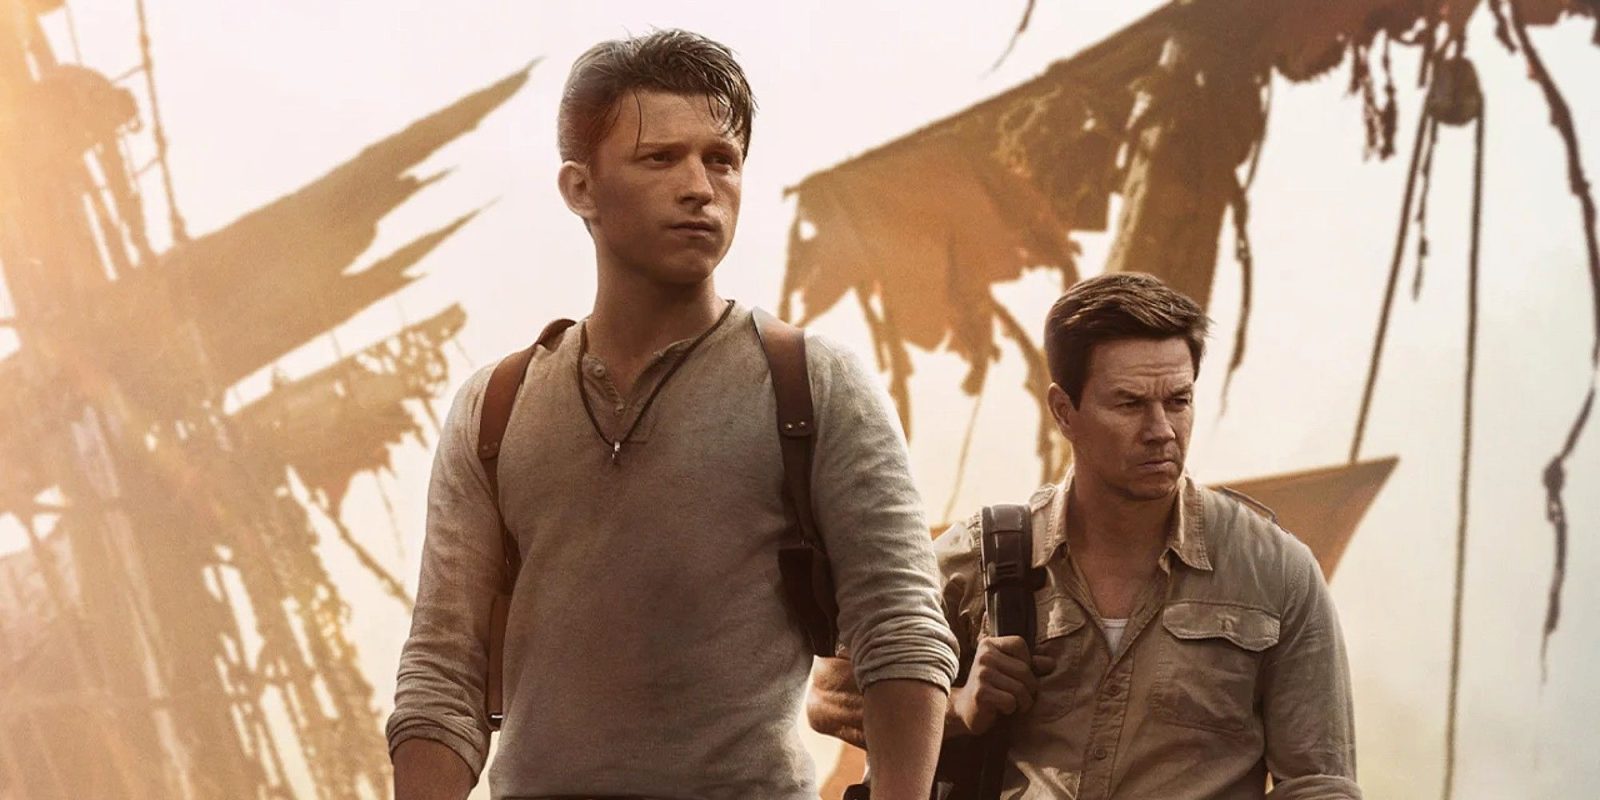 Uncharted film recensione commento